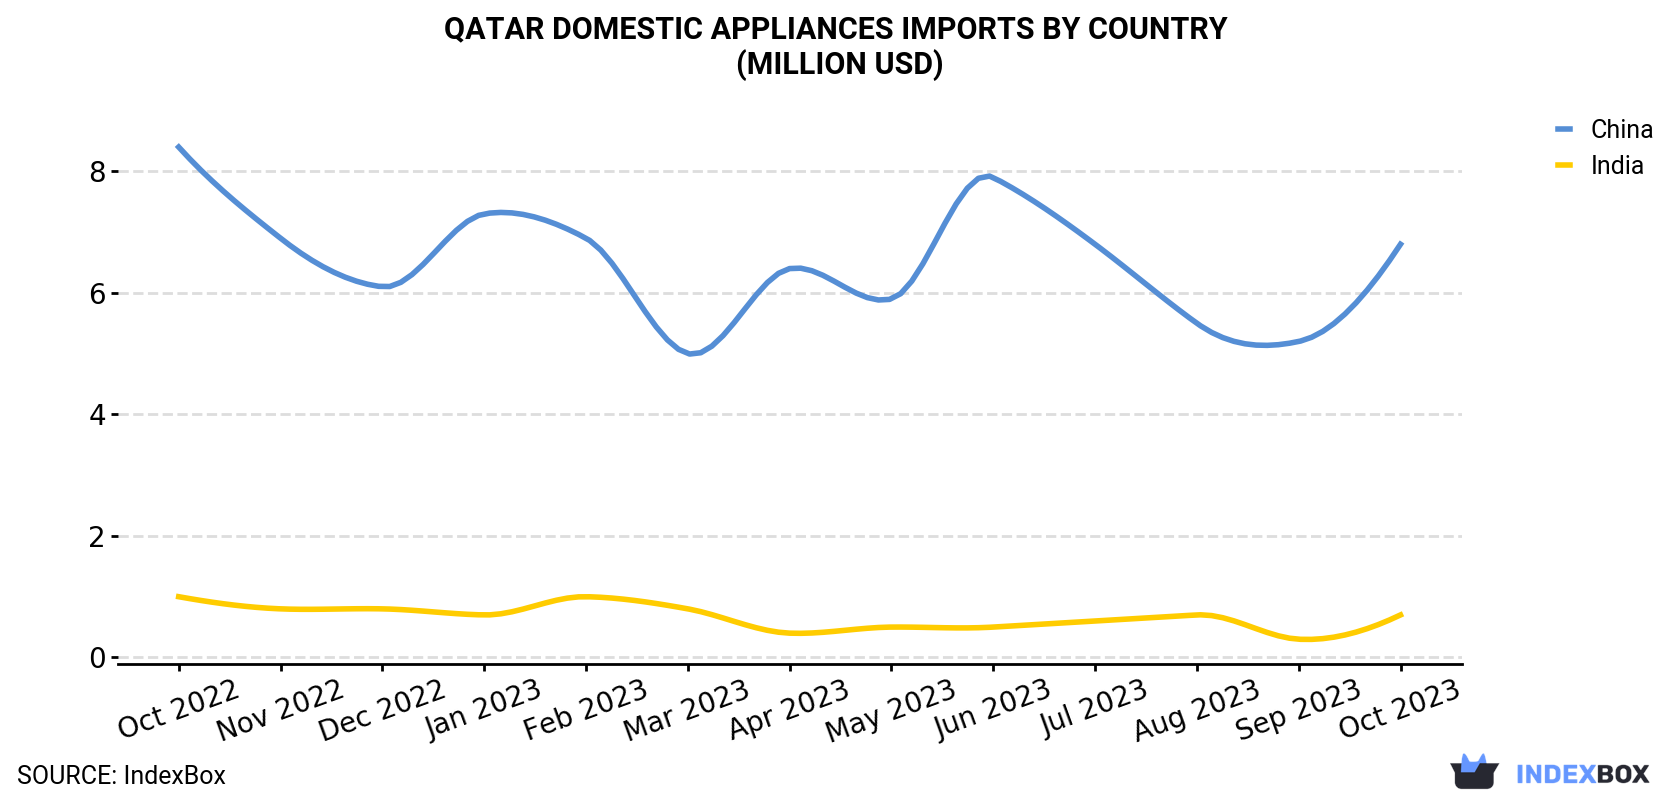 Qatar Domestic Appliances Imports By Country (Million USD)